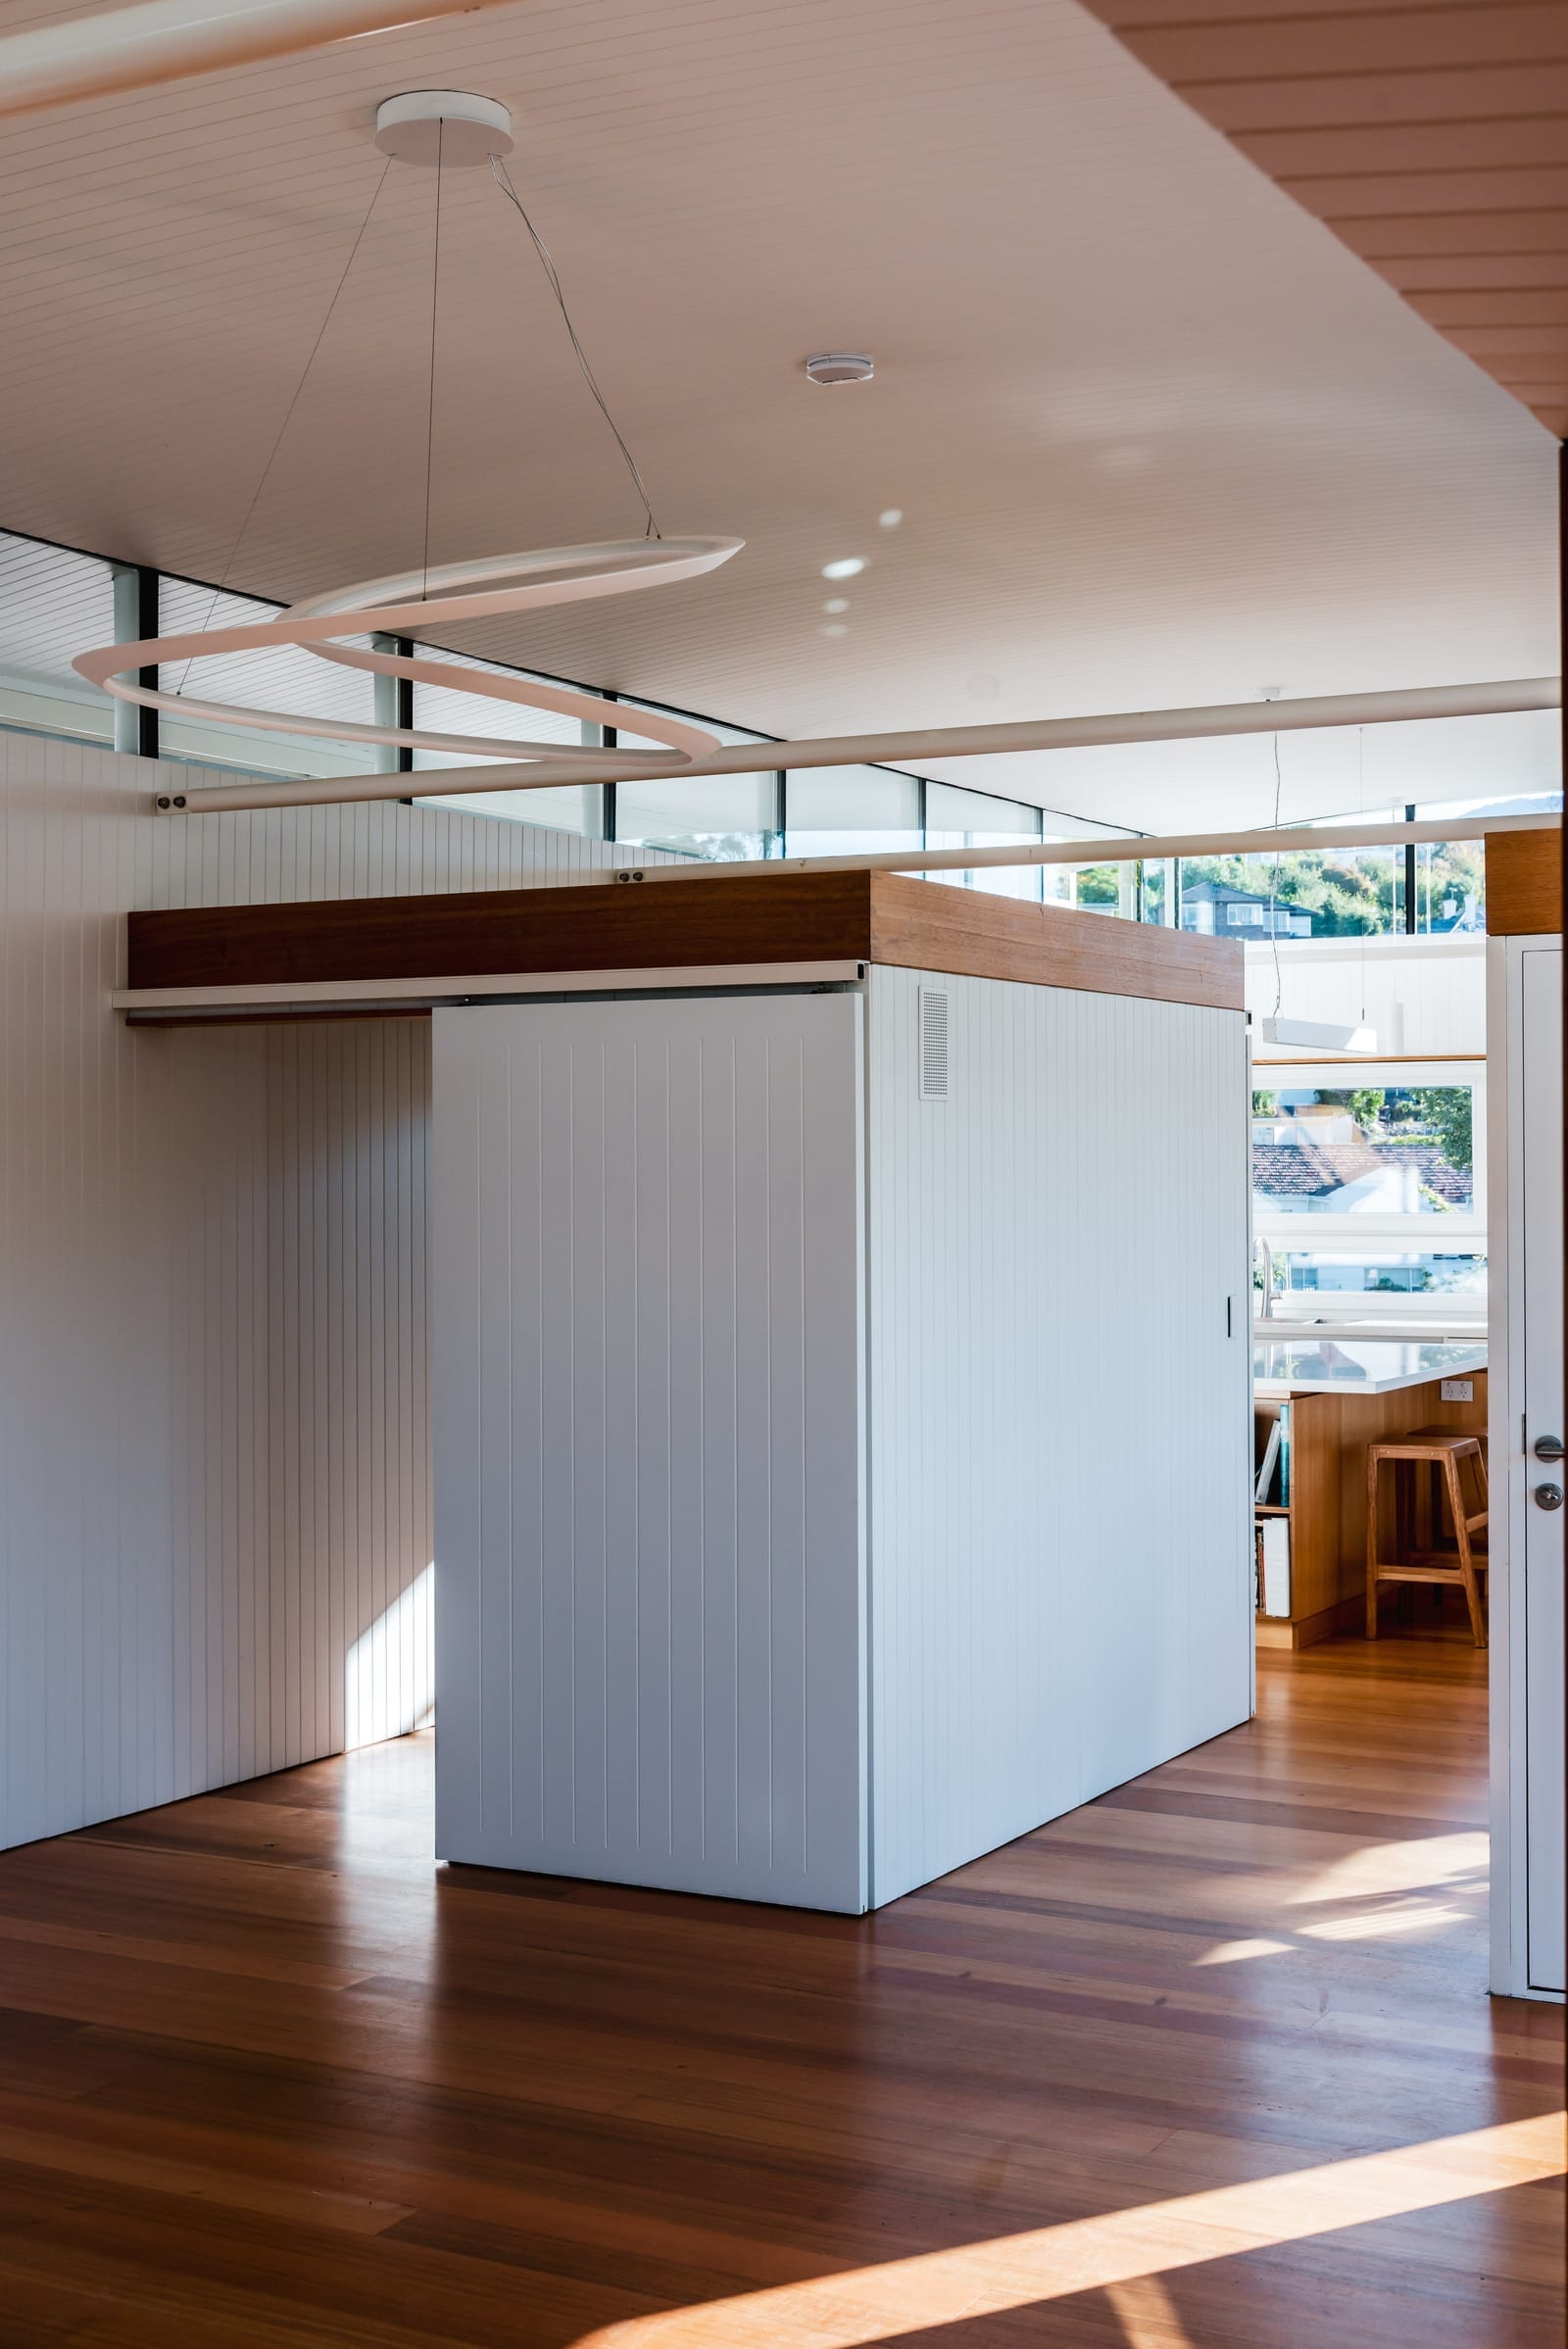 Wattle Bird House by Flett Architecture. Photography by Matt Sansom. White timber paneled walls dividing open plan dining space. Timber floors and high ceilings. 